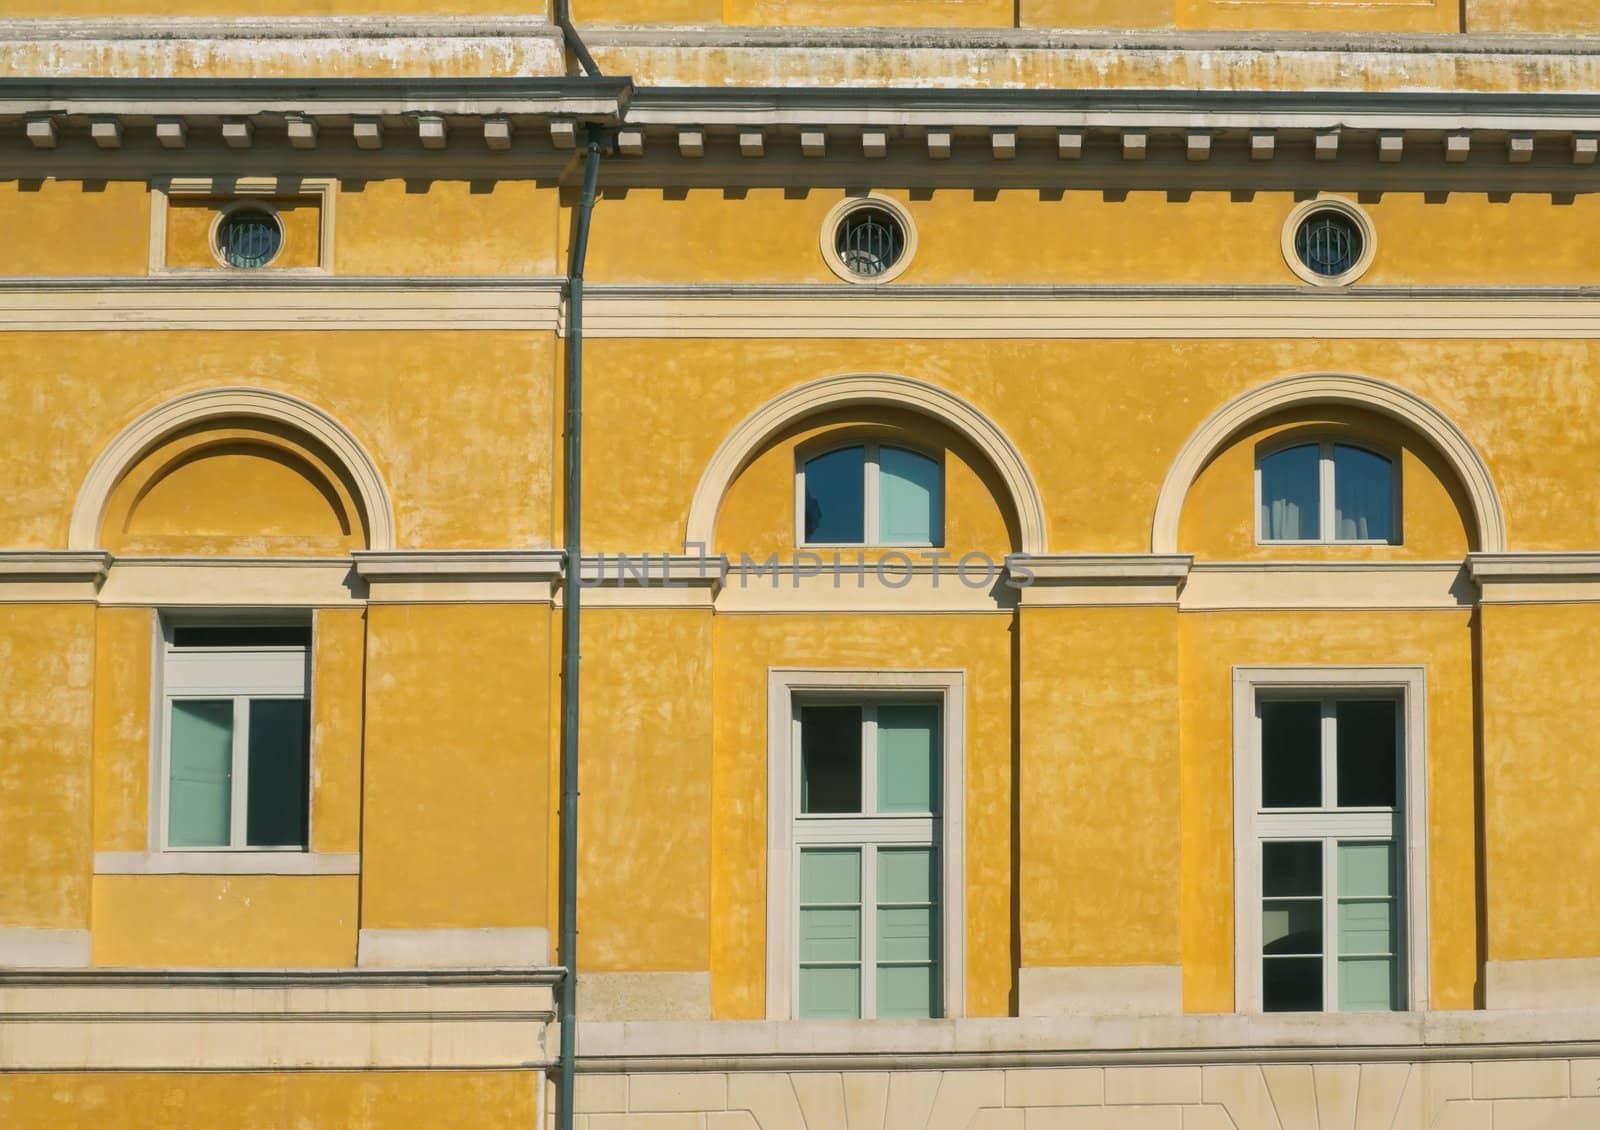 Three windows on the facade of the yellow house in the classical style